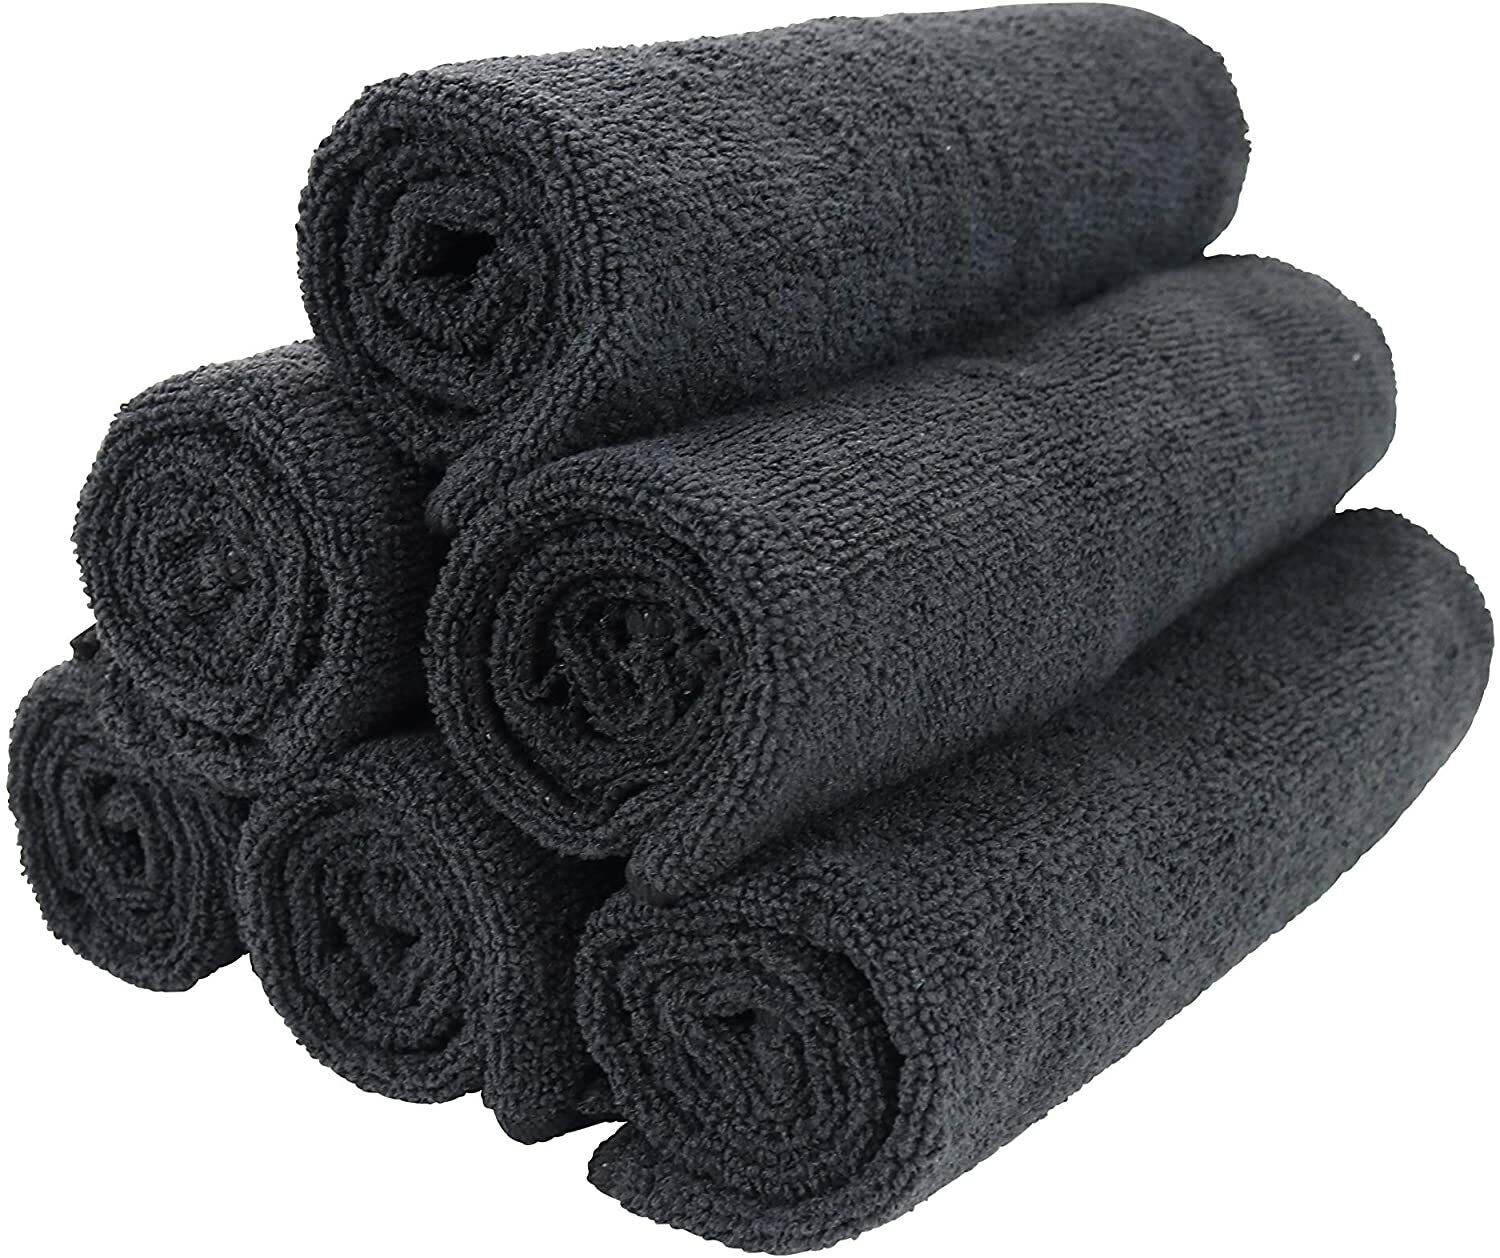 24 Pack of Microfiber Salon Towels - Bleach Safe - Black 16 x 27 - Stylist Towel Arkwright Does Not Apply - фотография #3